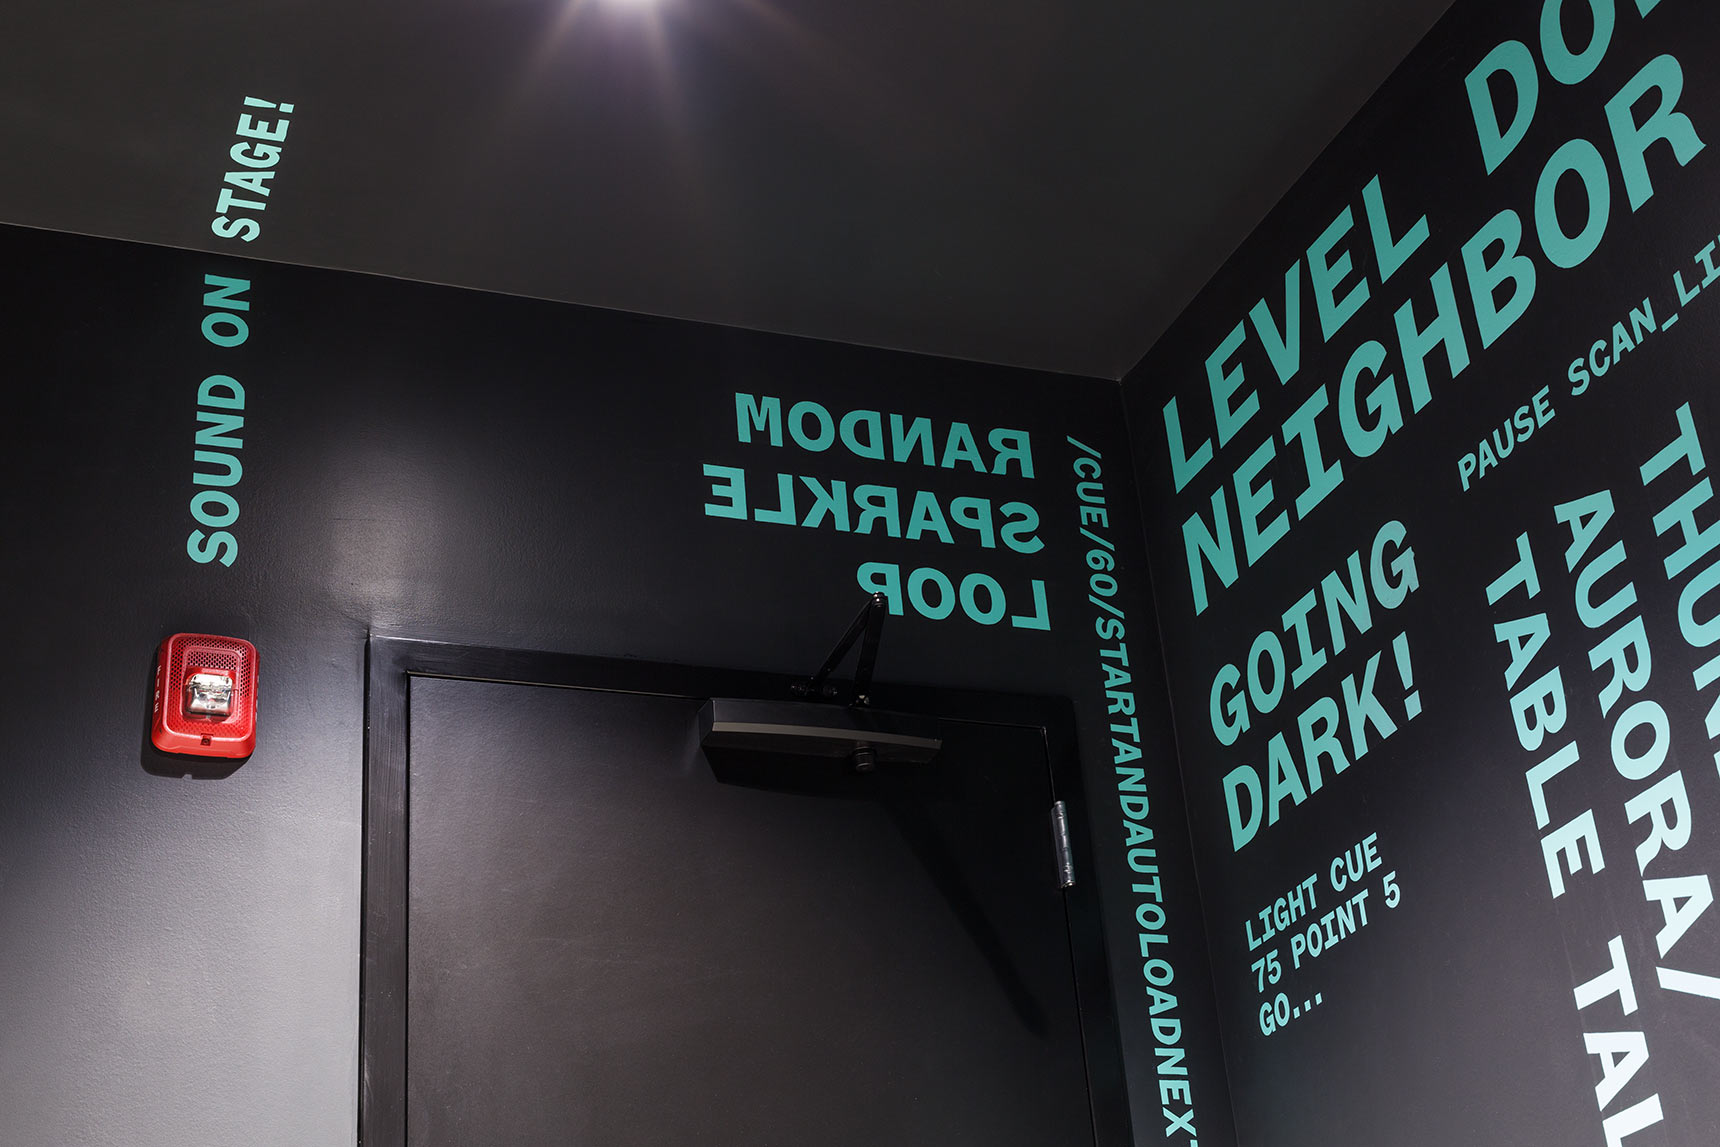 Mint-colored giant typography kinetic poetry wraps around the restroom interiors of the Voxel Theater